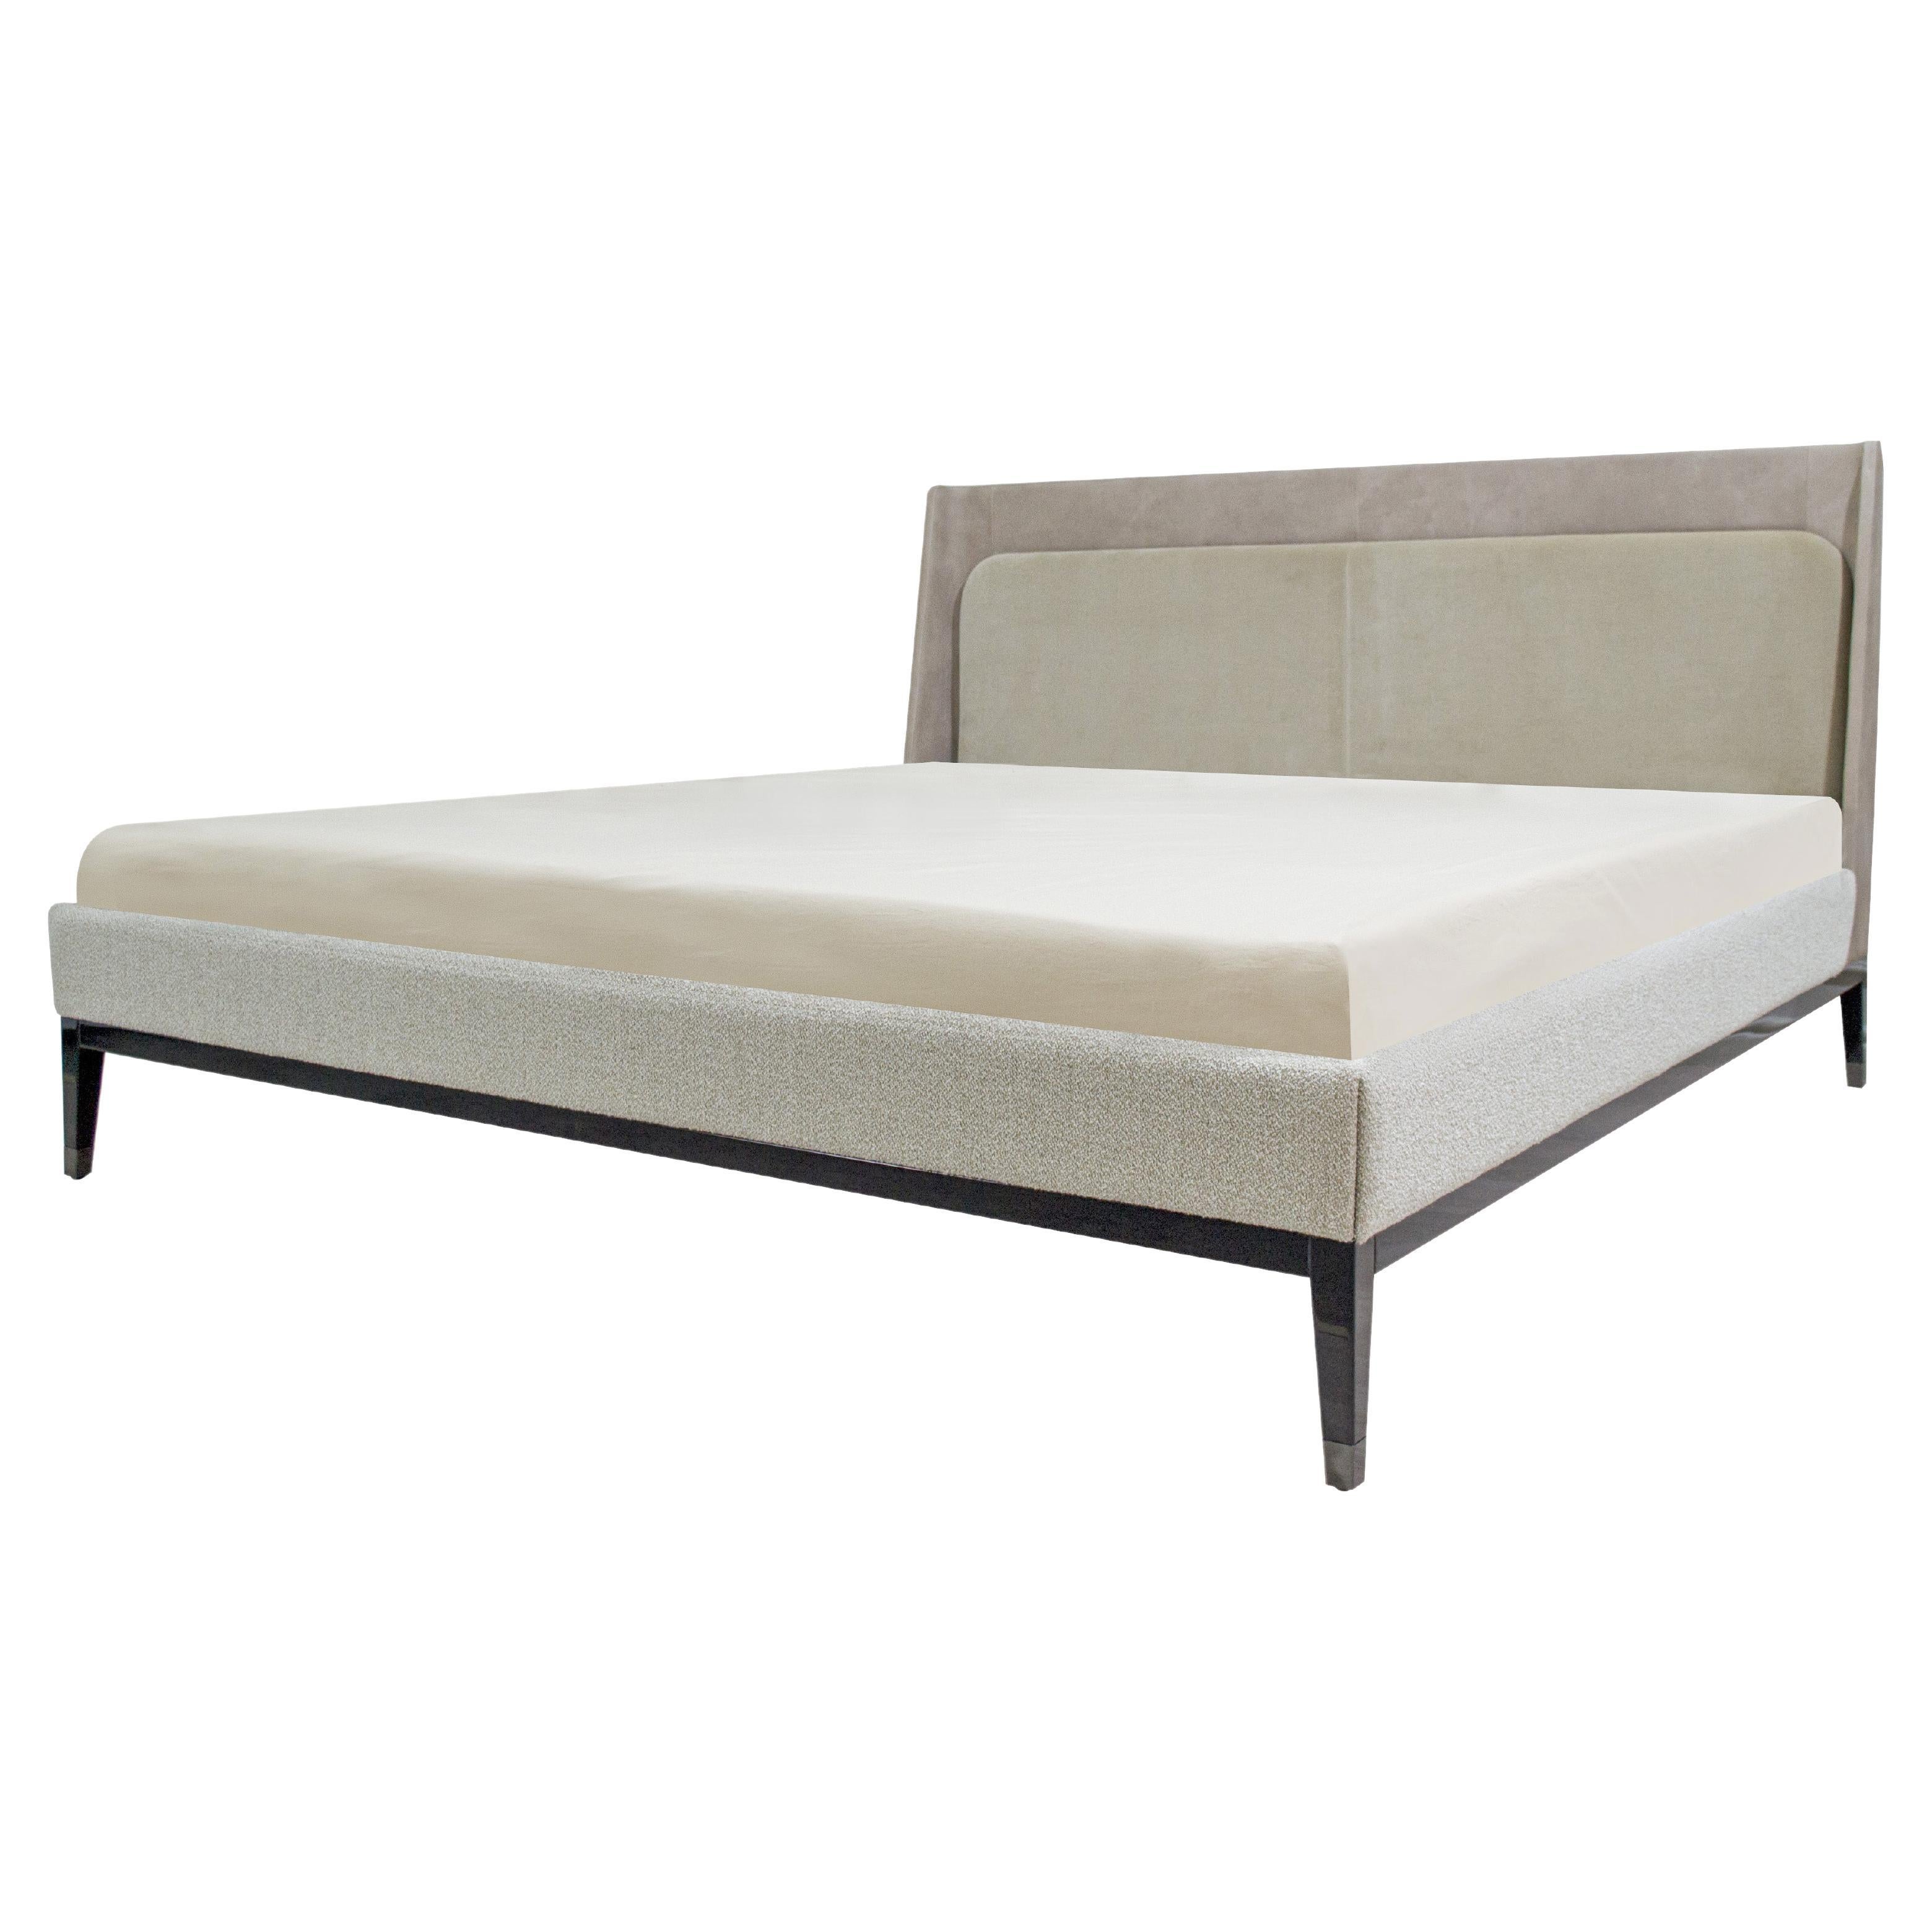 Italian Bed Upholstered in Nubuck and Quinoa Boucle Fabric with Wooden Legs